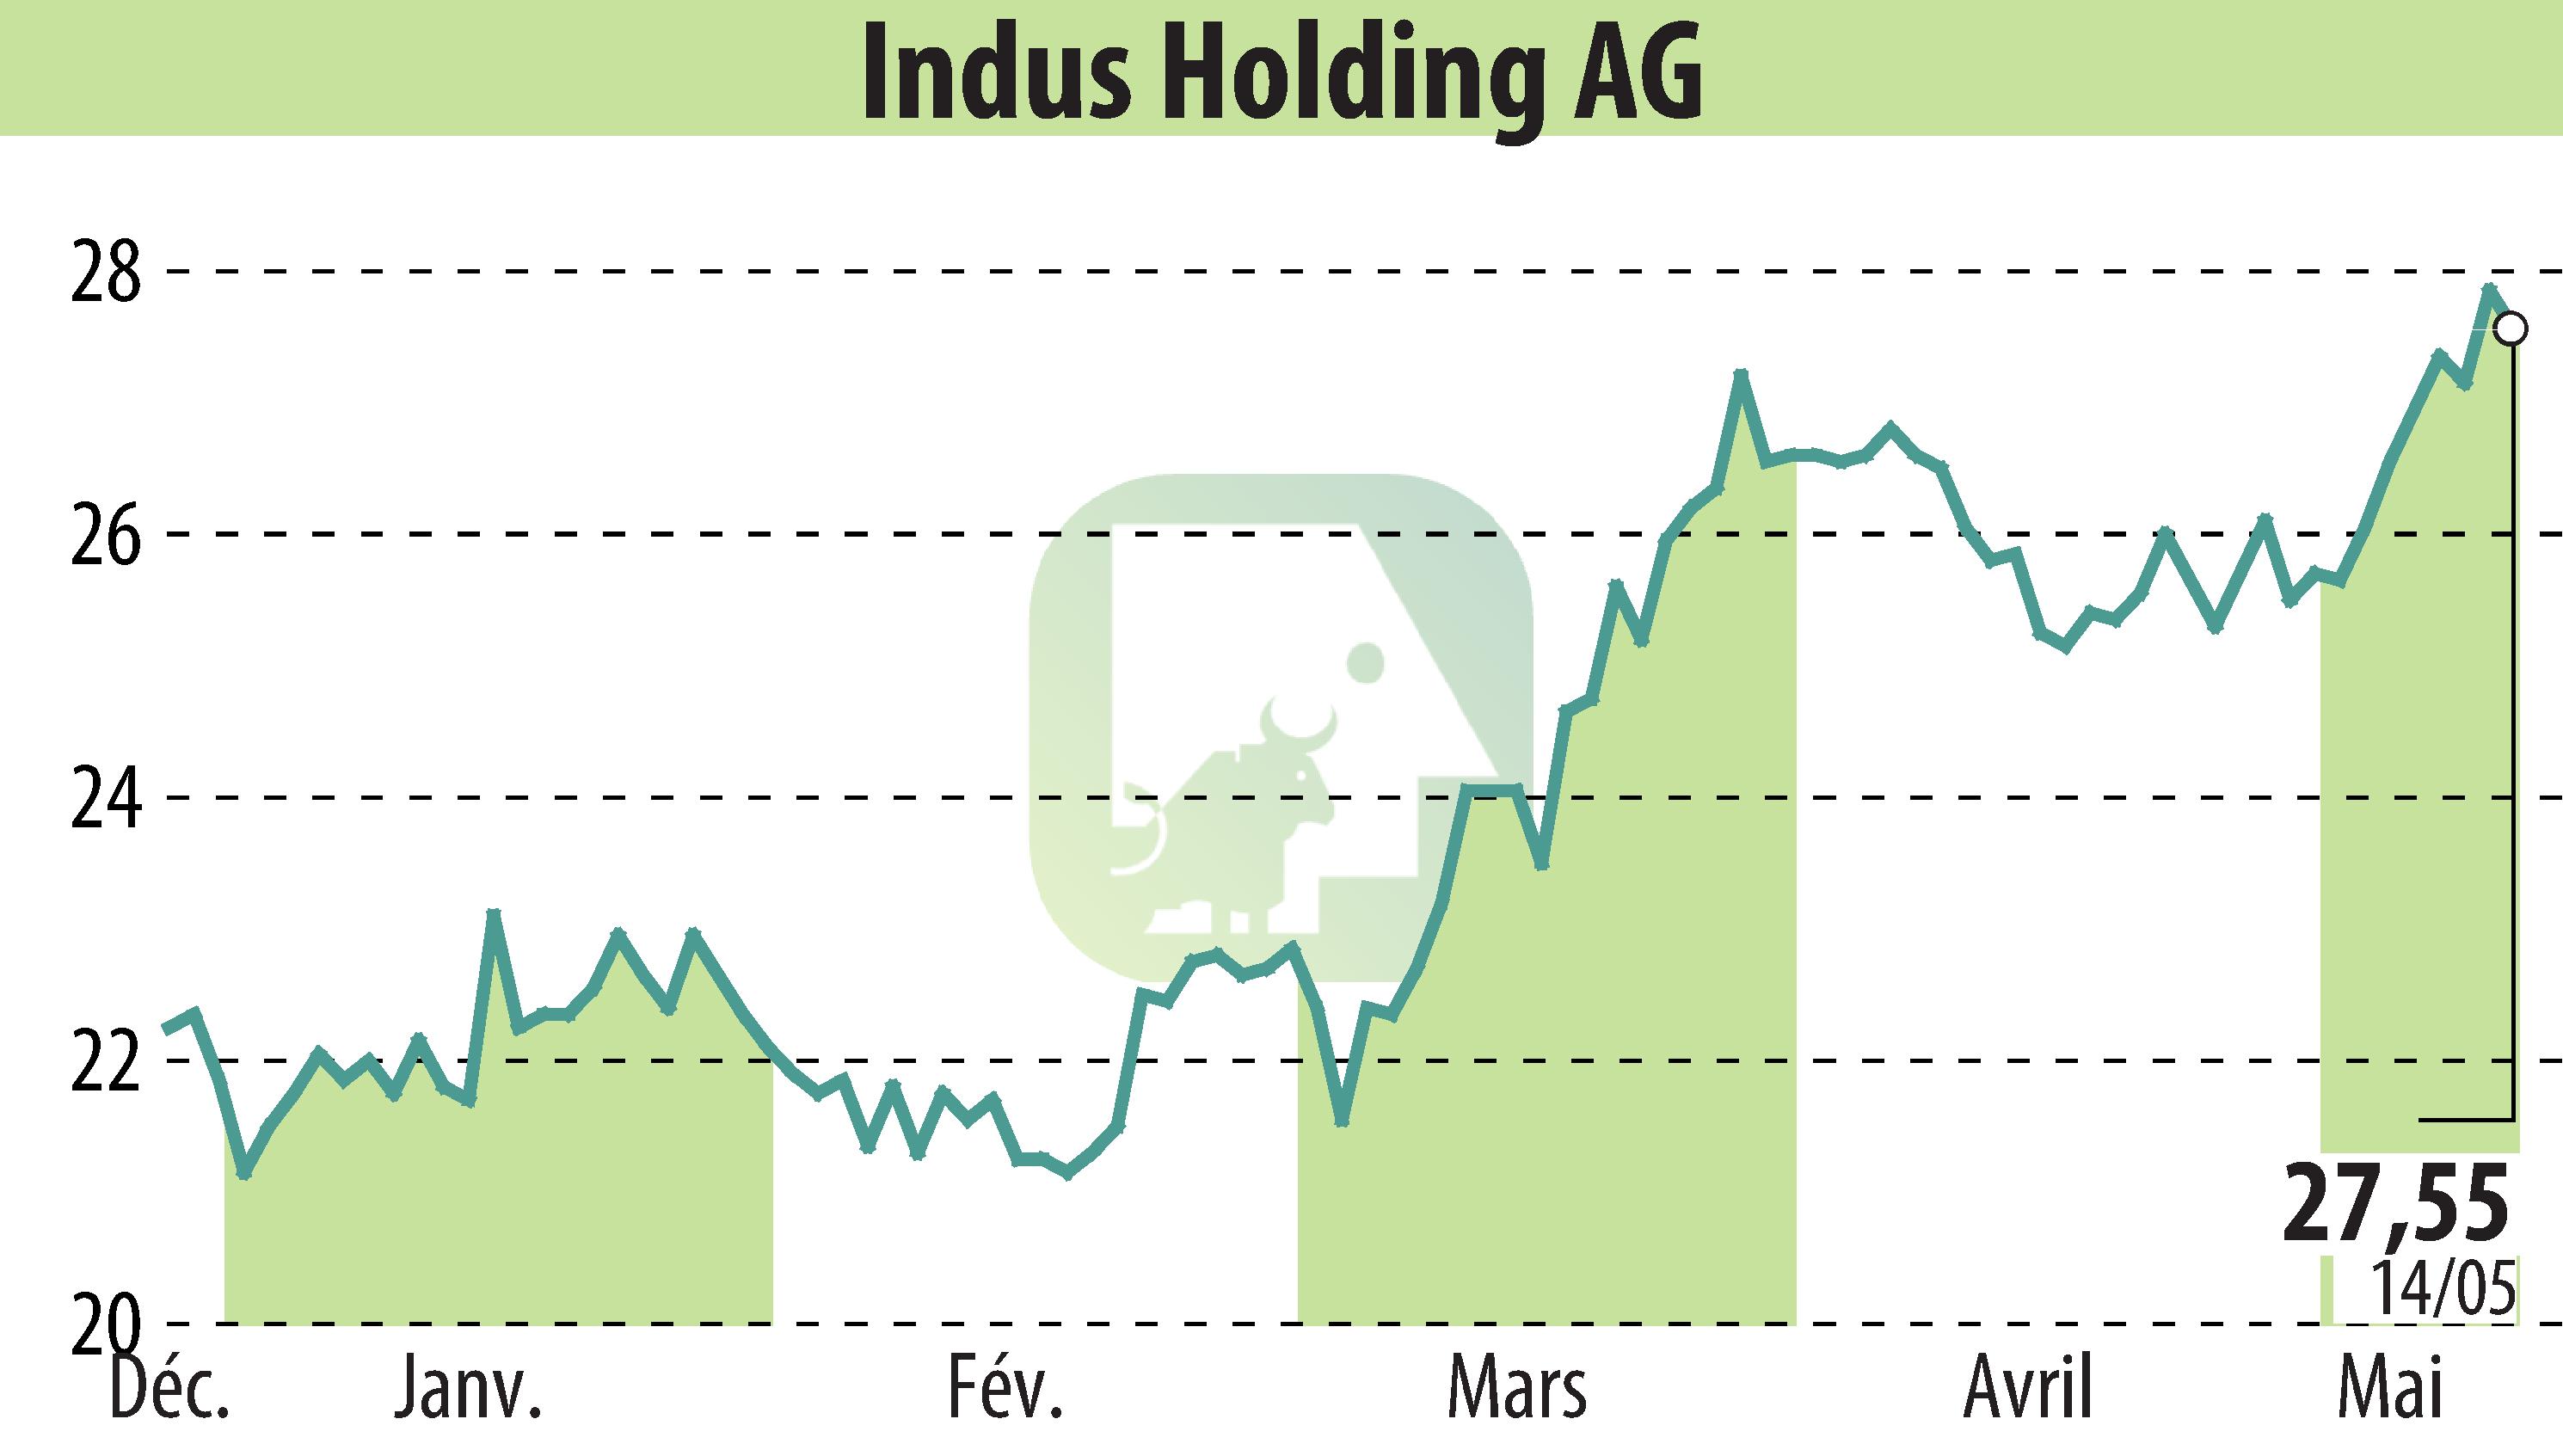 Stock price chart of INDUS Holding AG (EBR:INH) showing fluctuations.